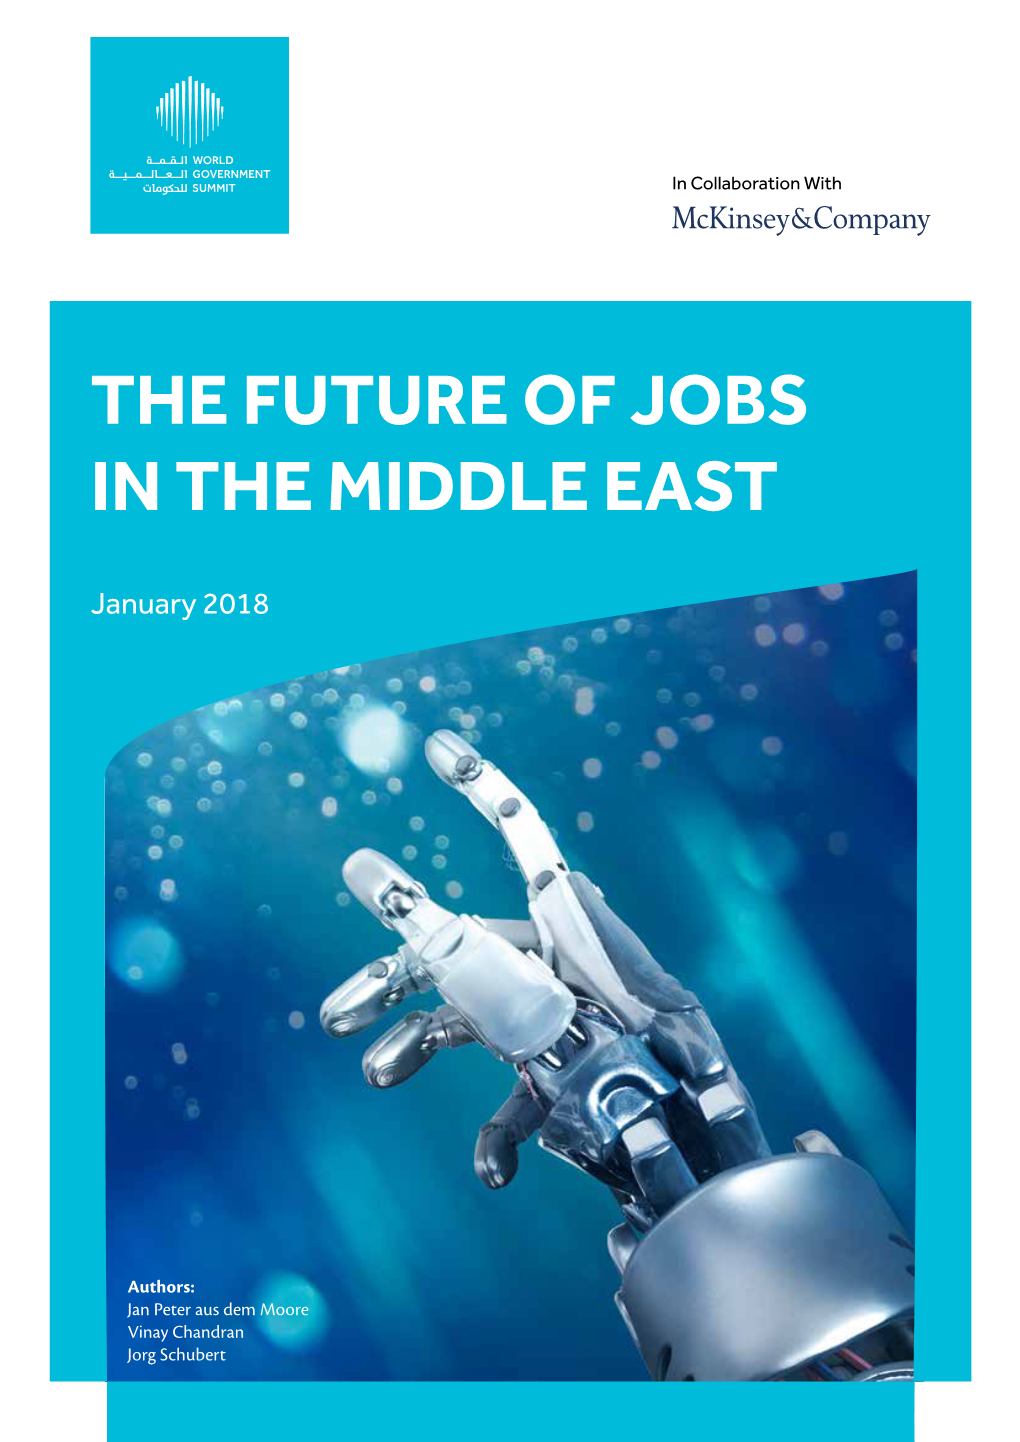 The Future of Jobs in the Middle East